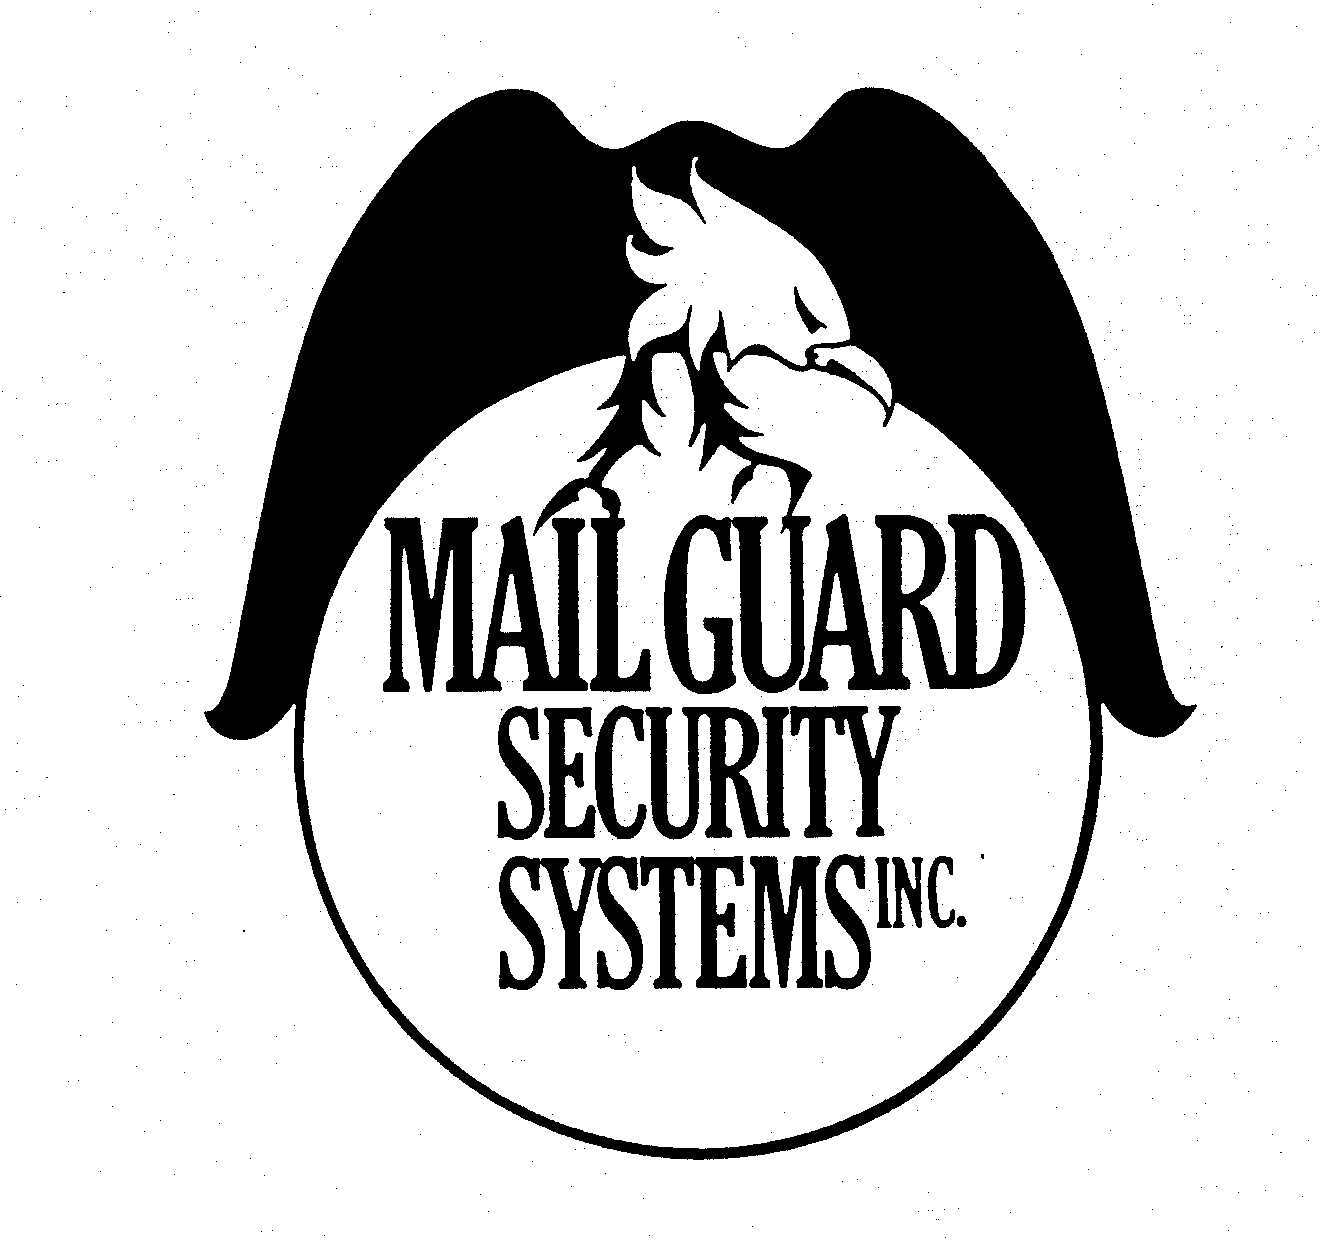  MAILGUARD SECURITY SYSTEMS INC.